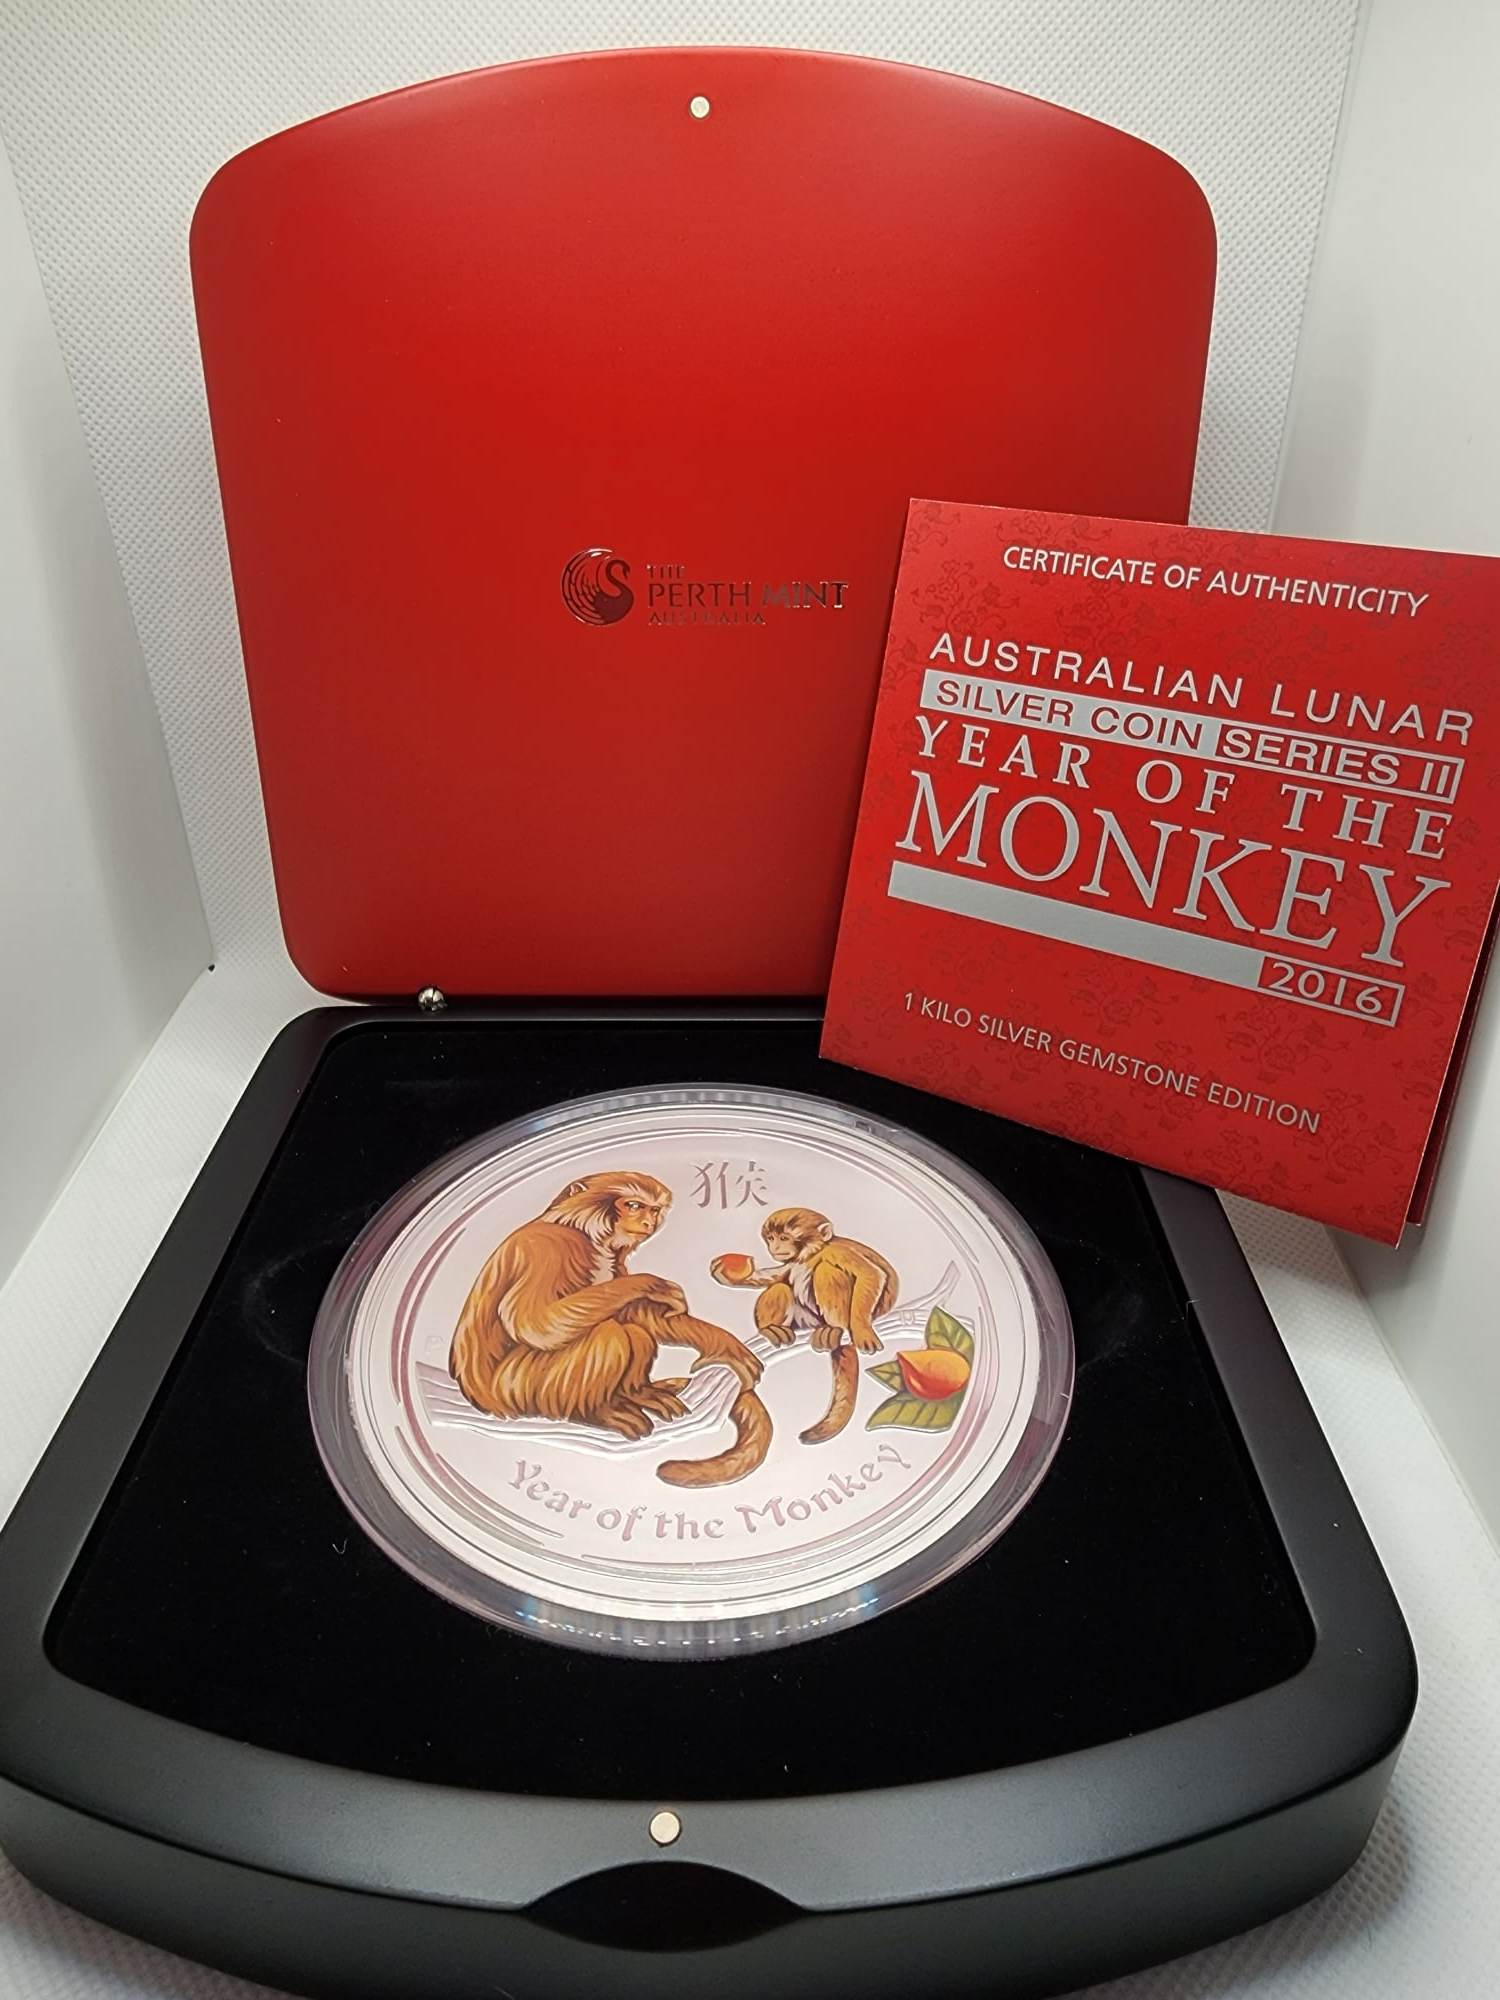 Thumbnail for 2016 One Kilo Year of the Monkey Coloured Coin with Cognac Diamond Eye